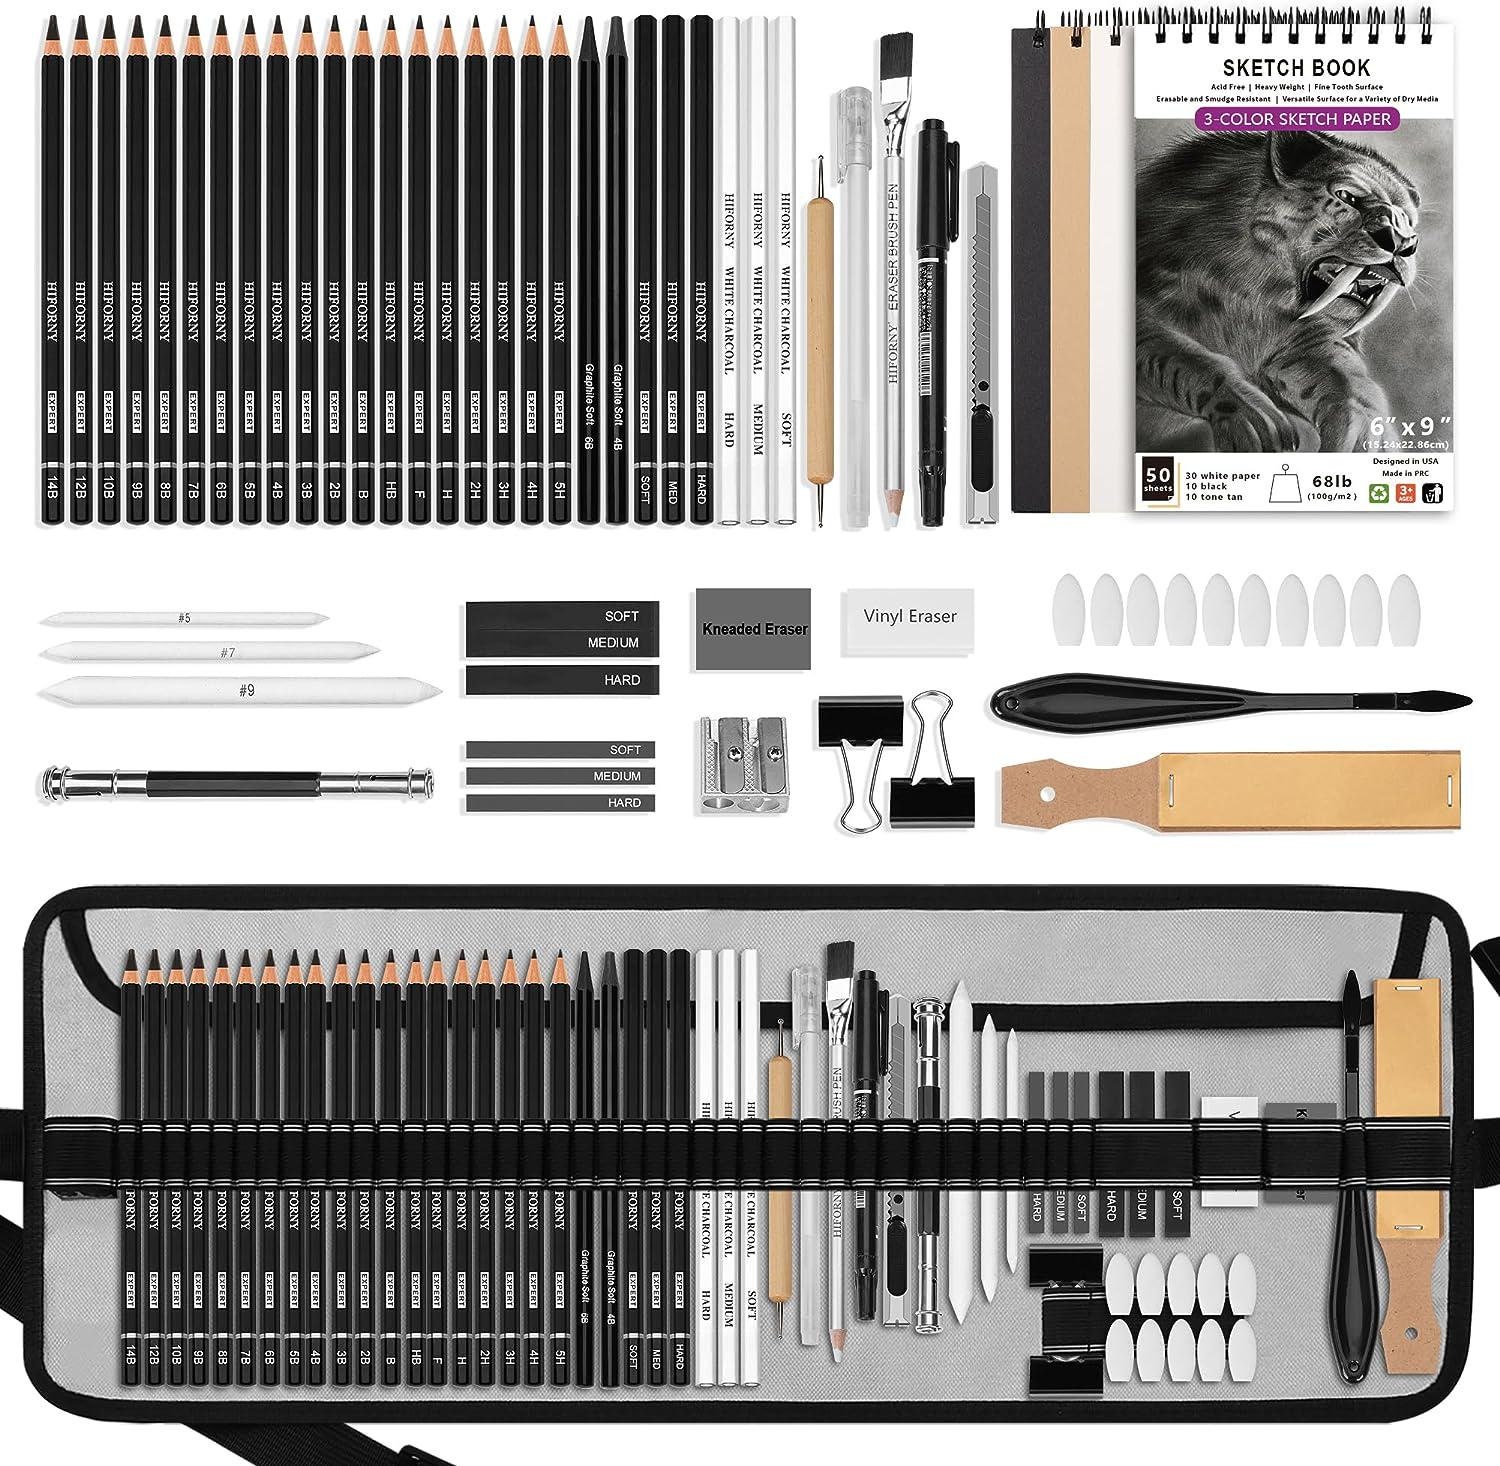 Prina 76 Pack Drawing Set Sketching Kit - Pro Art Supplies with 3-Color  Sketchbook & Tutorial - Colored, Graphite, Charcoal, Watercolor Pencil 